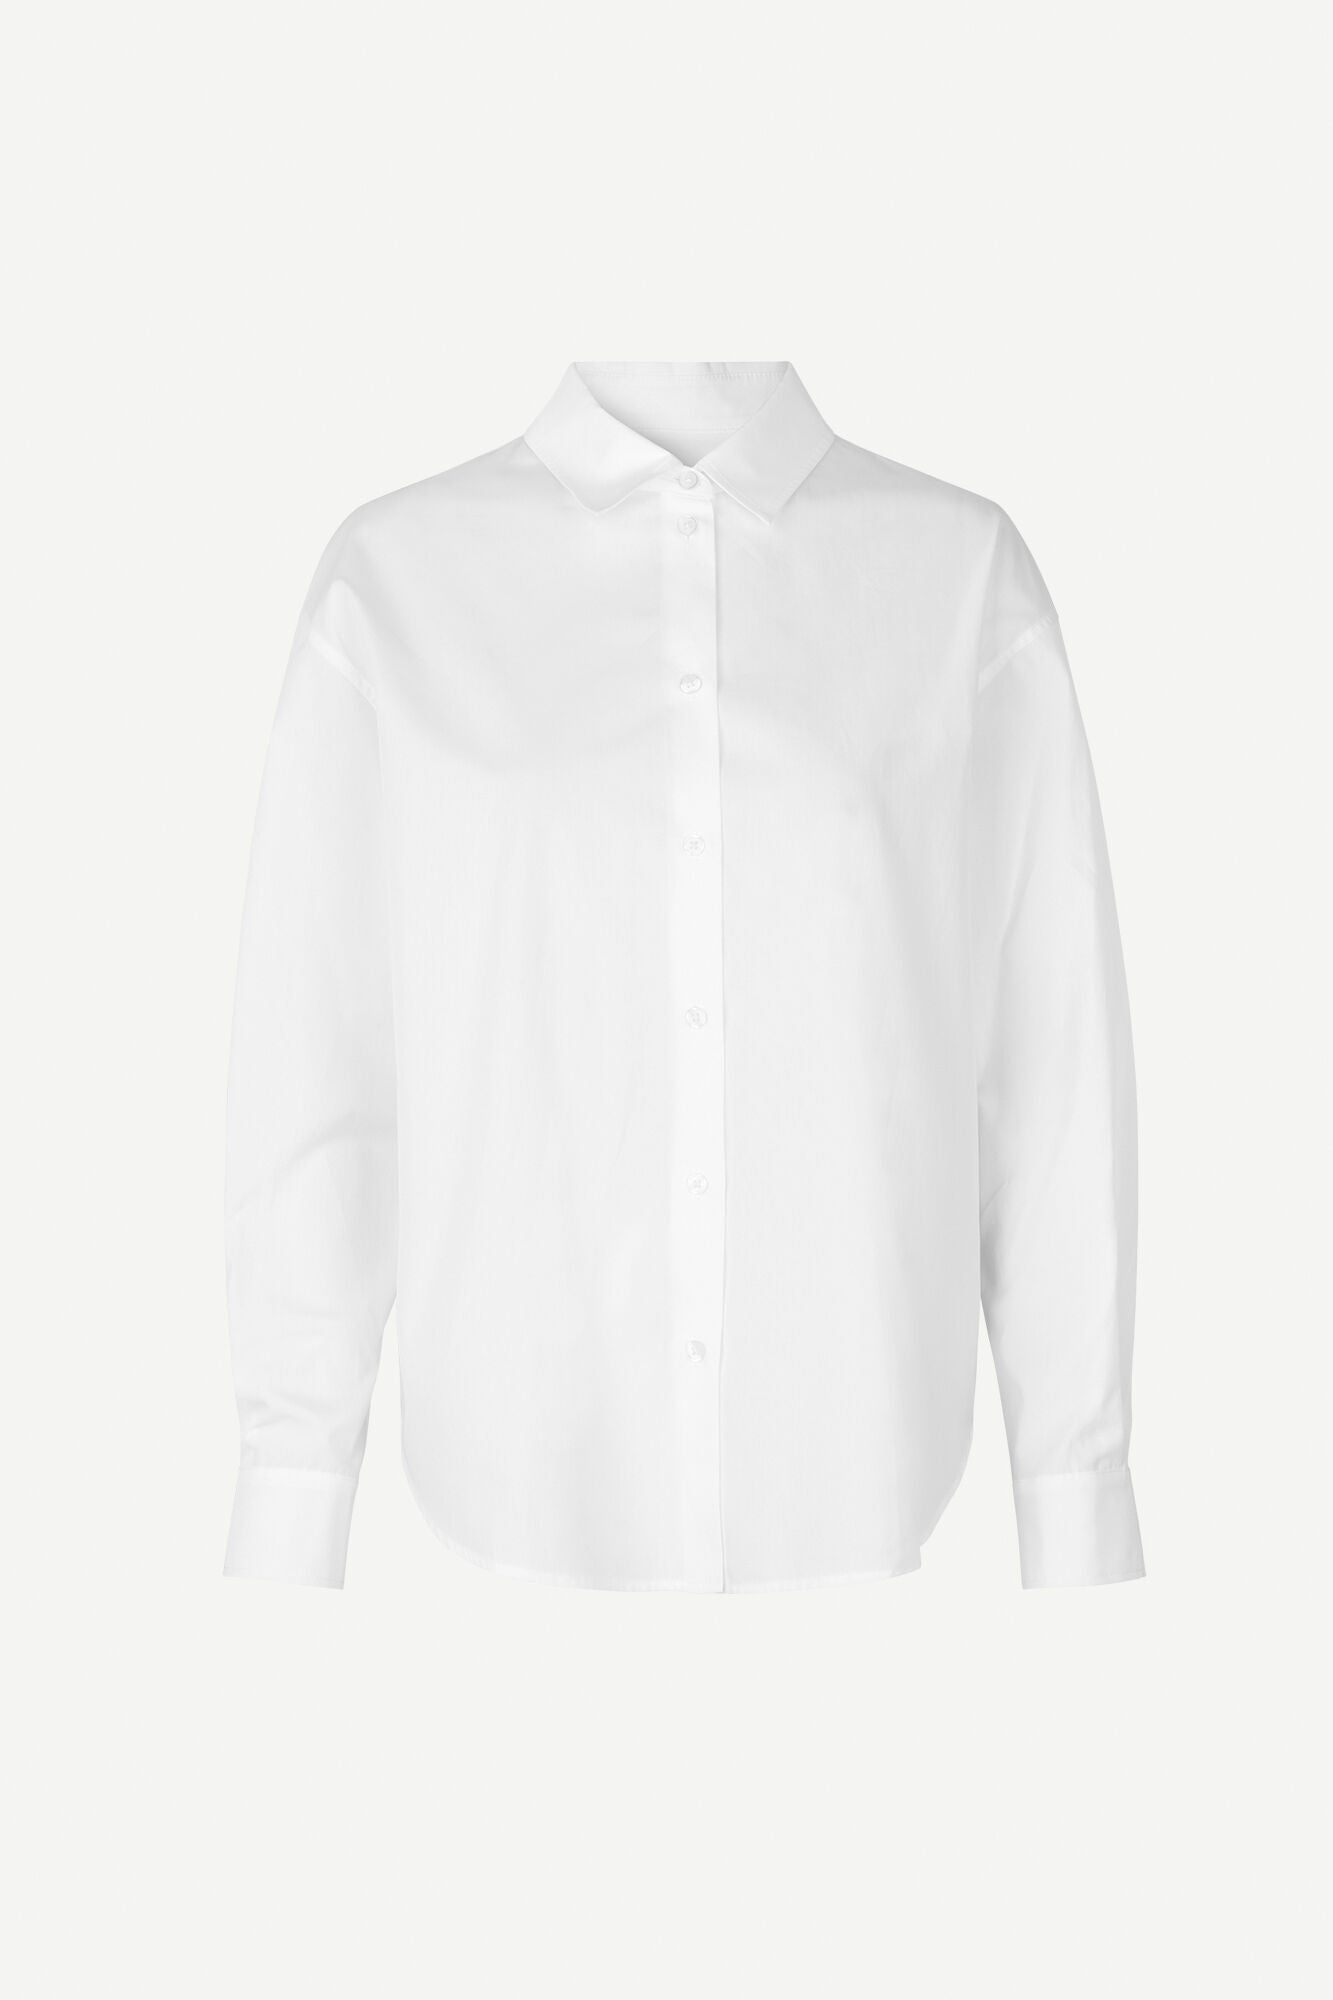 DROPPED SHOULDER COTTON SHIRT IN WHITE